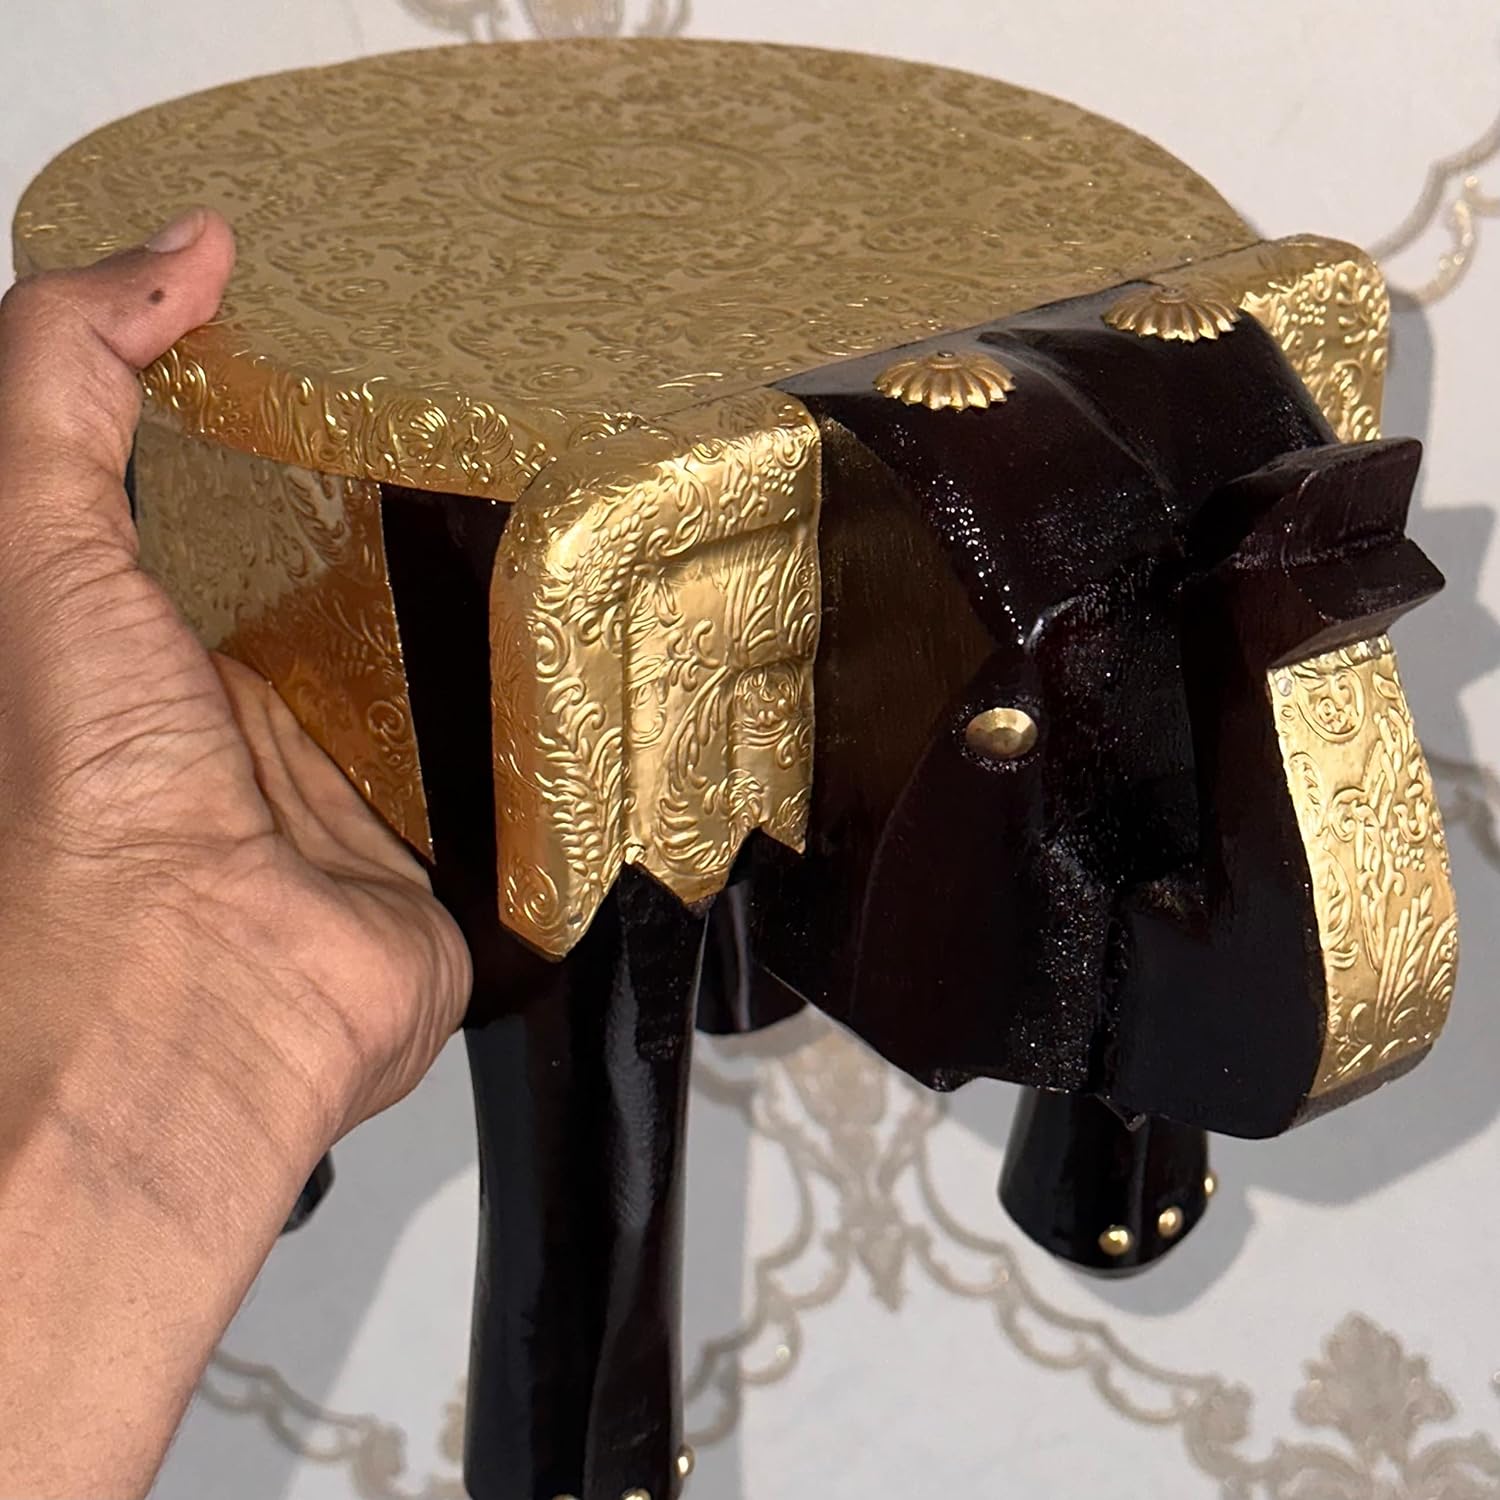 Hand-Painted Colorful Wooden Elephant Stool (Metal Engraved)